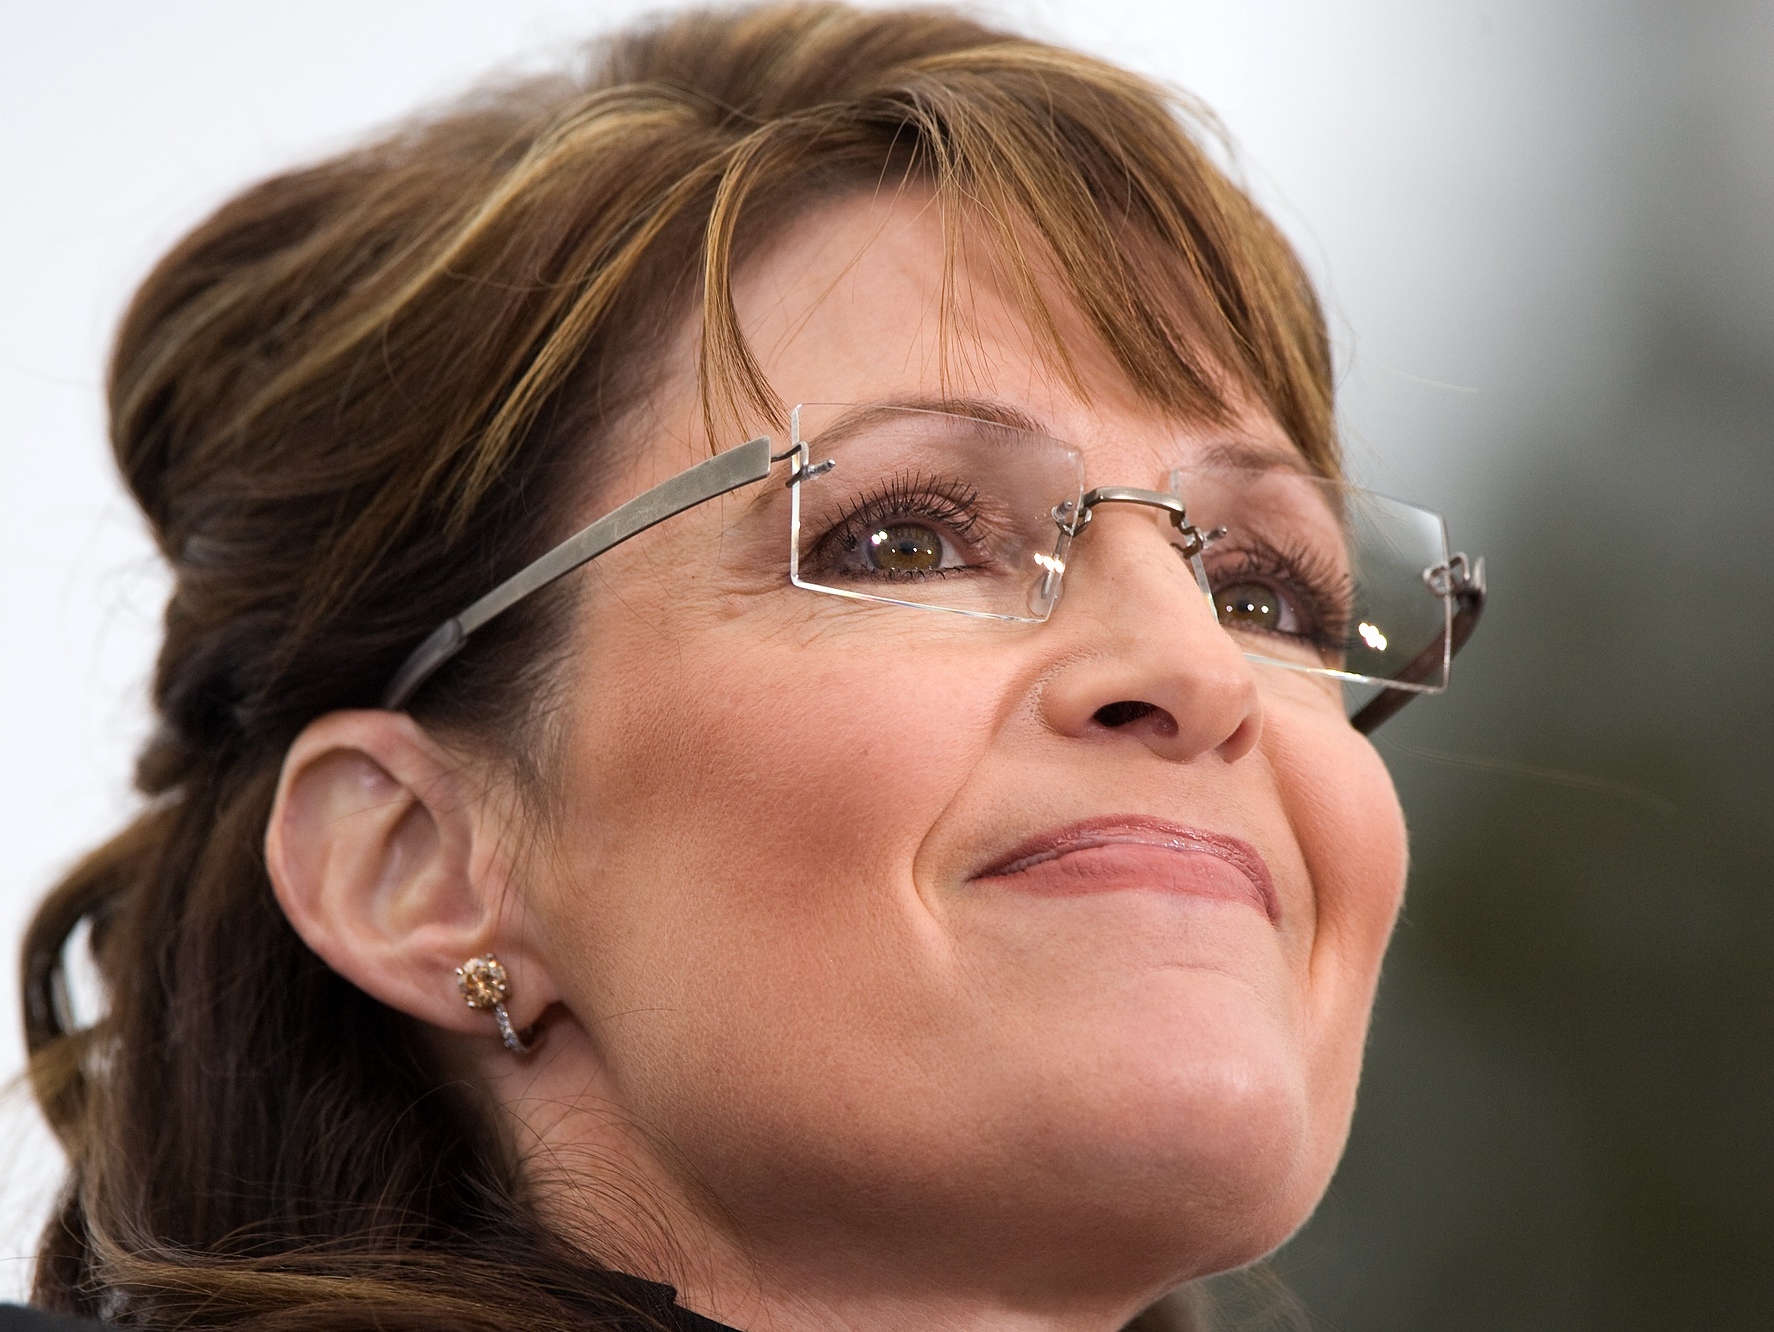 Top Ten Quotes from Sarah Palin's RightOnline Address